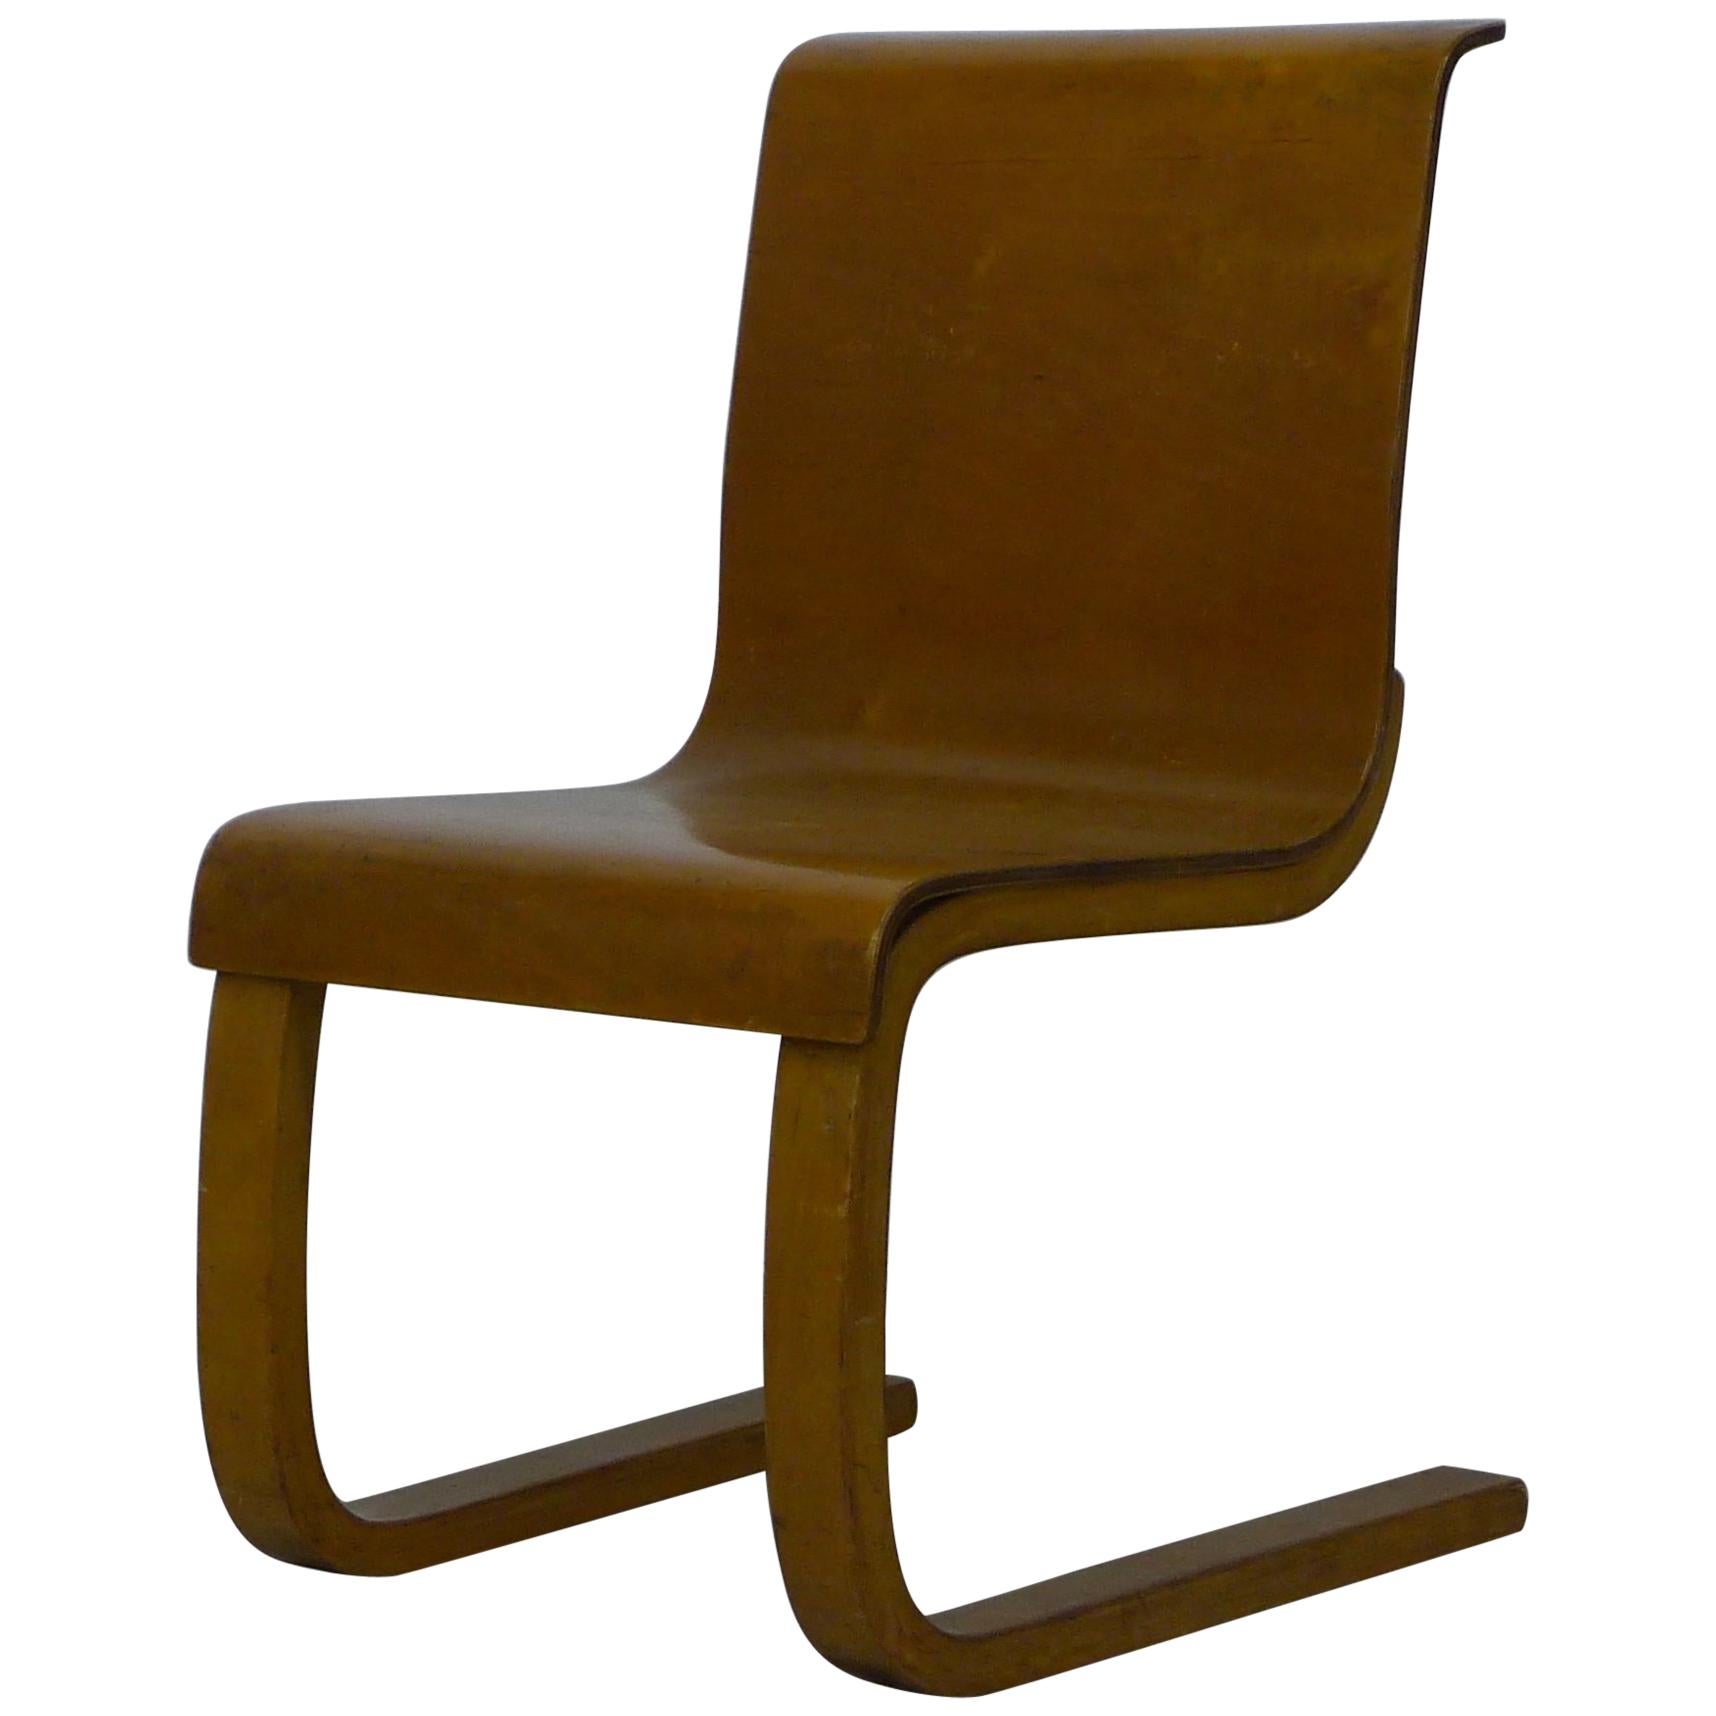 Alvar Aalto Type 21 Chair Molded Plywood, Finmar Label, 1930s